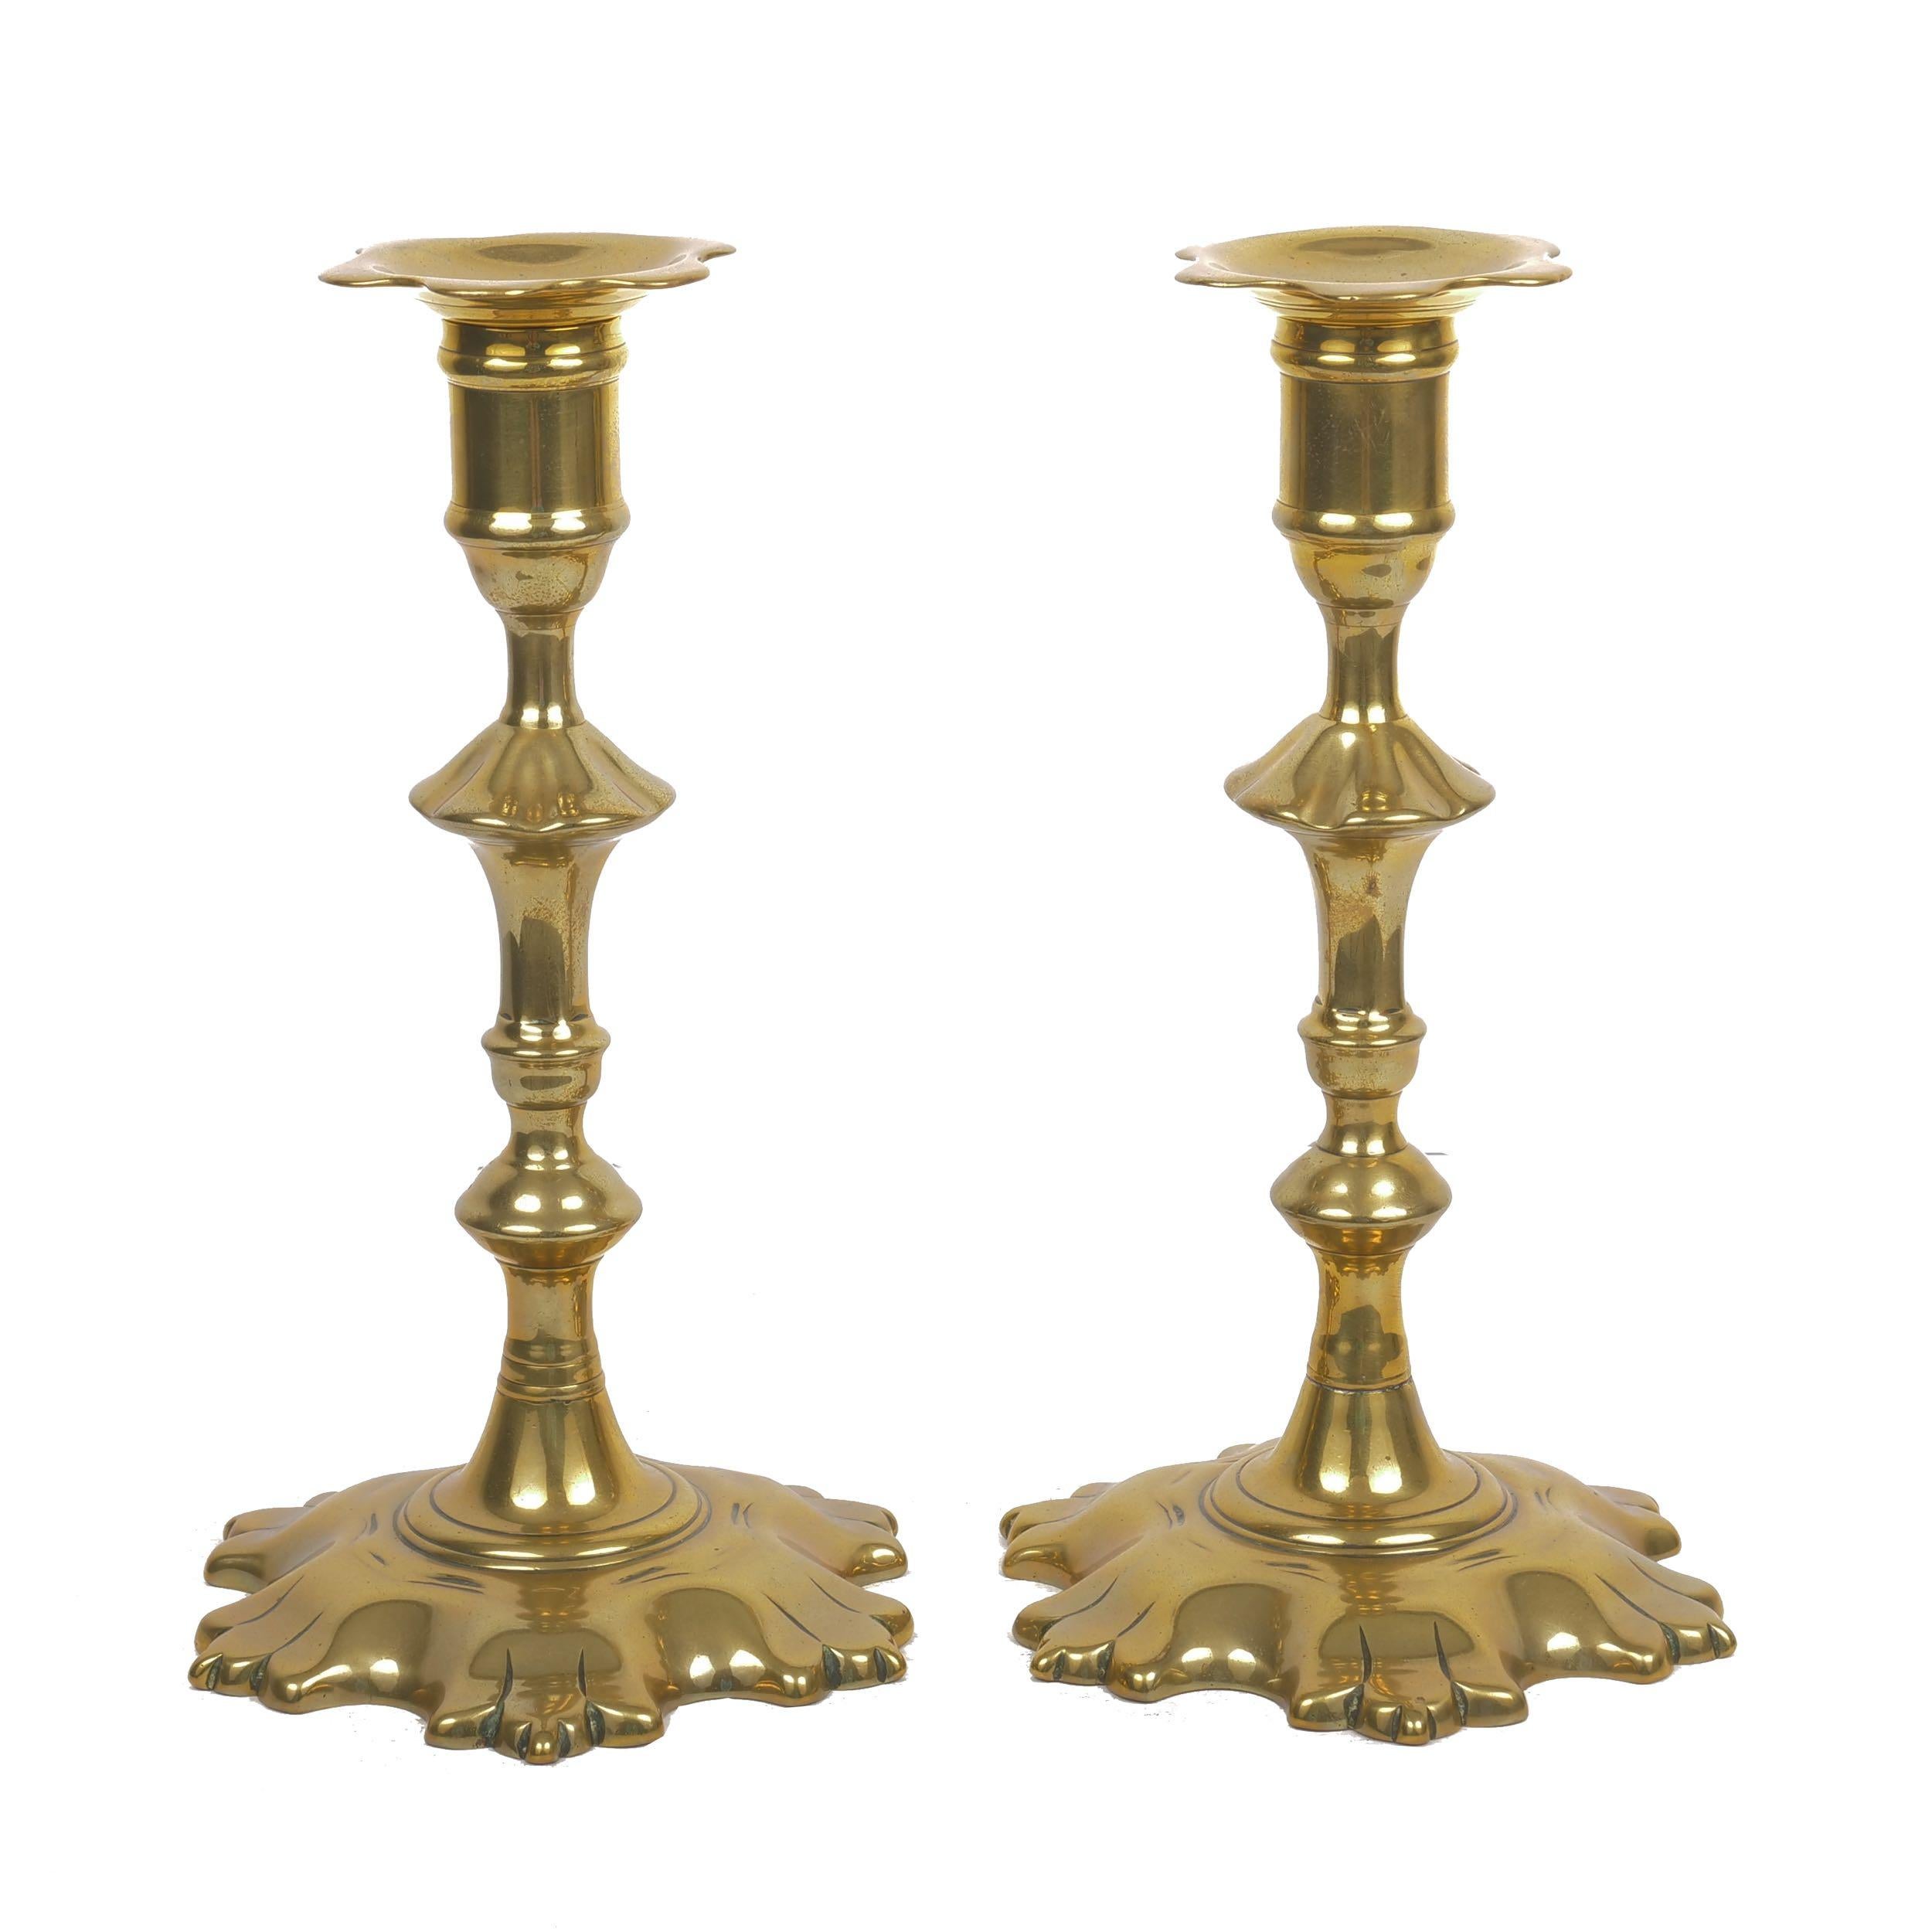 Pair of George II shell-base brass candlesticks
England, circa 1760
Item # C104016 

A fine pair of Georgian shell-base brass candlesticks with freely cast candle wells projecting over swollen-baluster stems. The undersides are beautifully